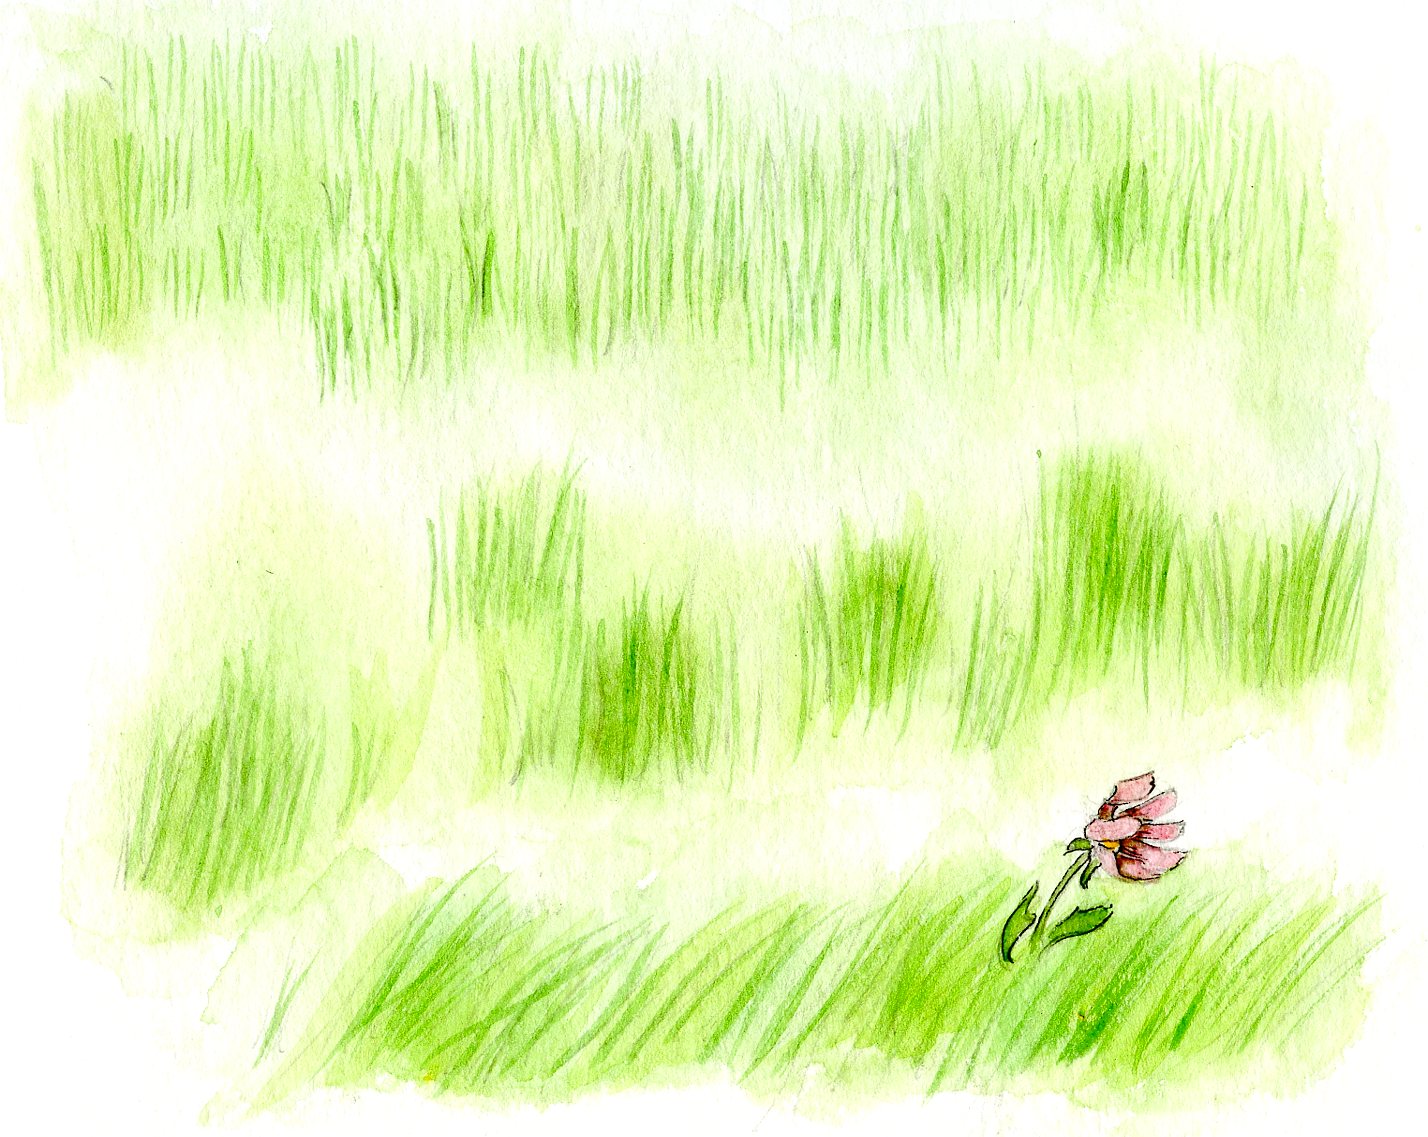 Learn how to paint grass in three styles with this quick watercolor tutorial